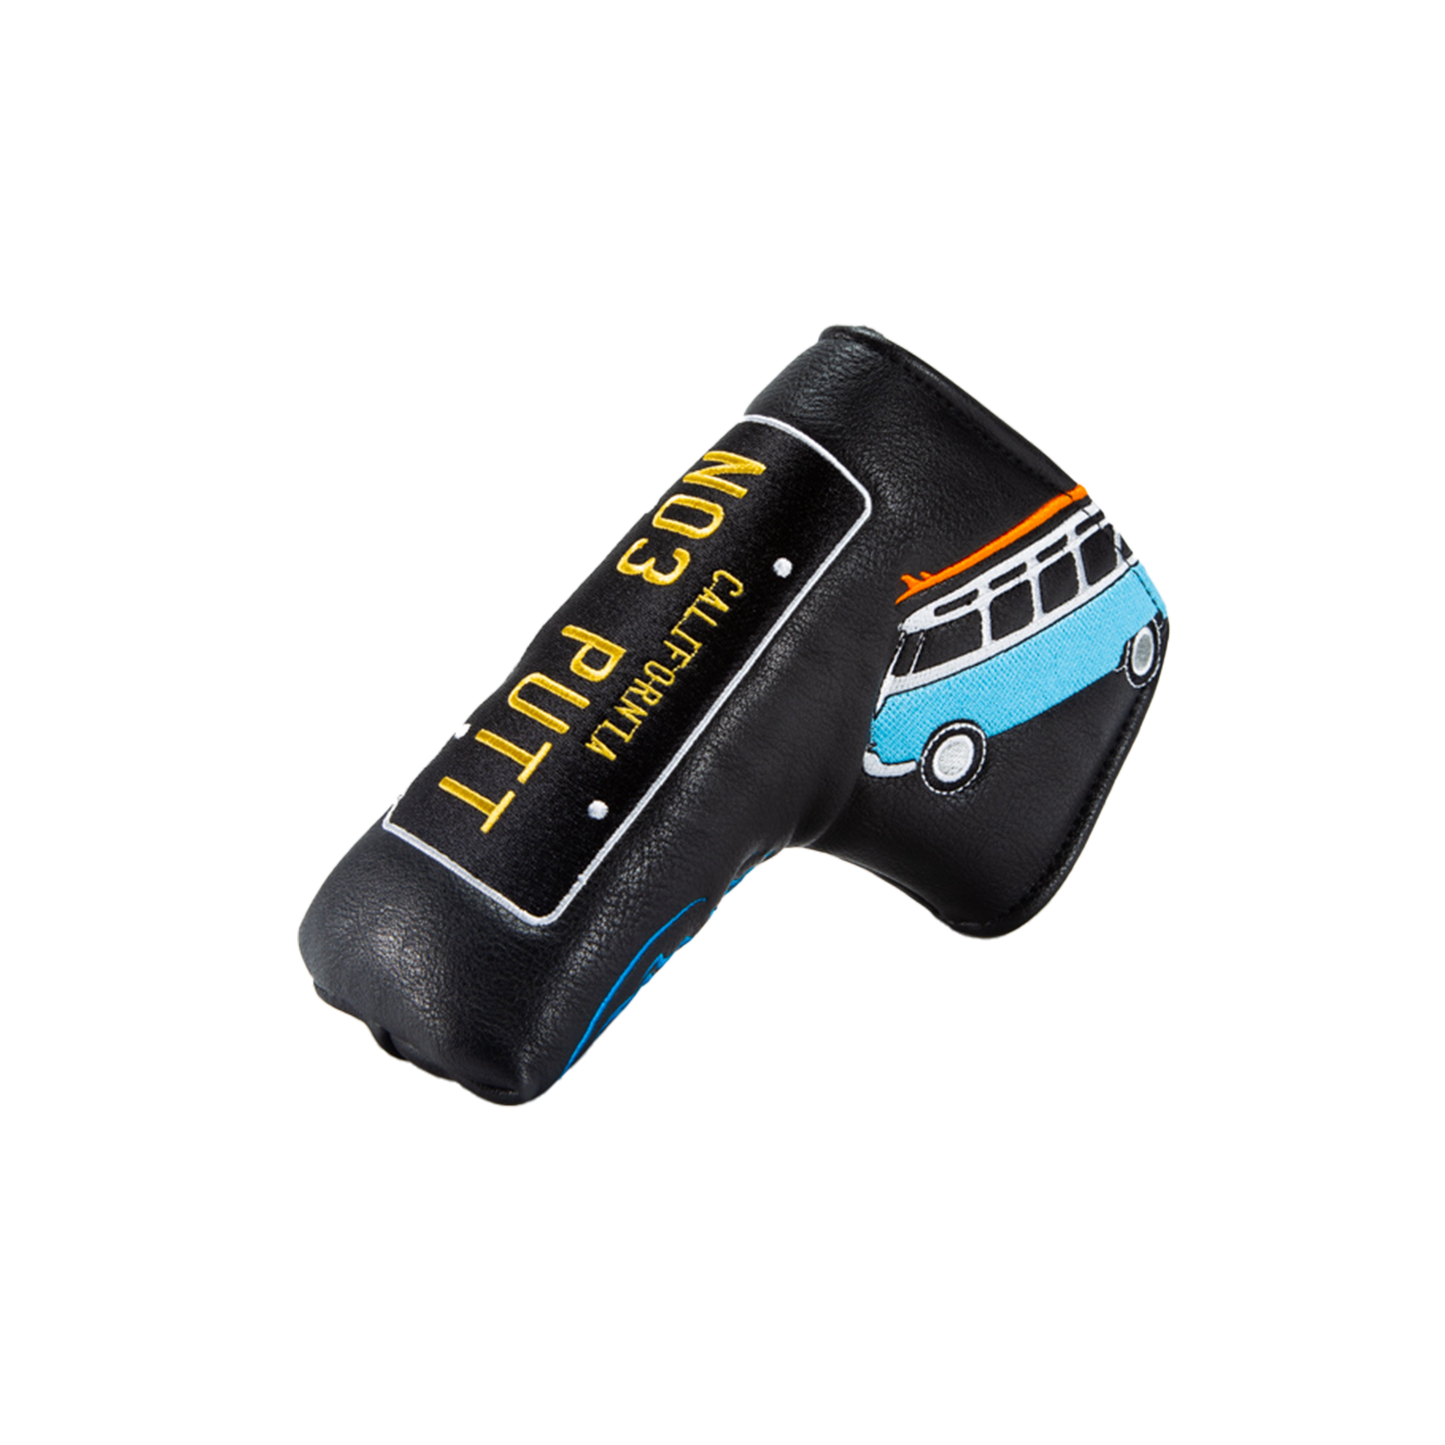 Cali "Route 66" Black Blade Putter Cover